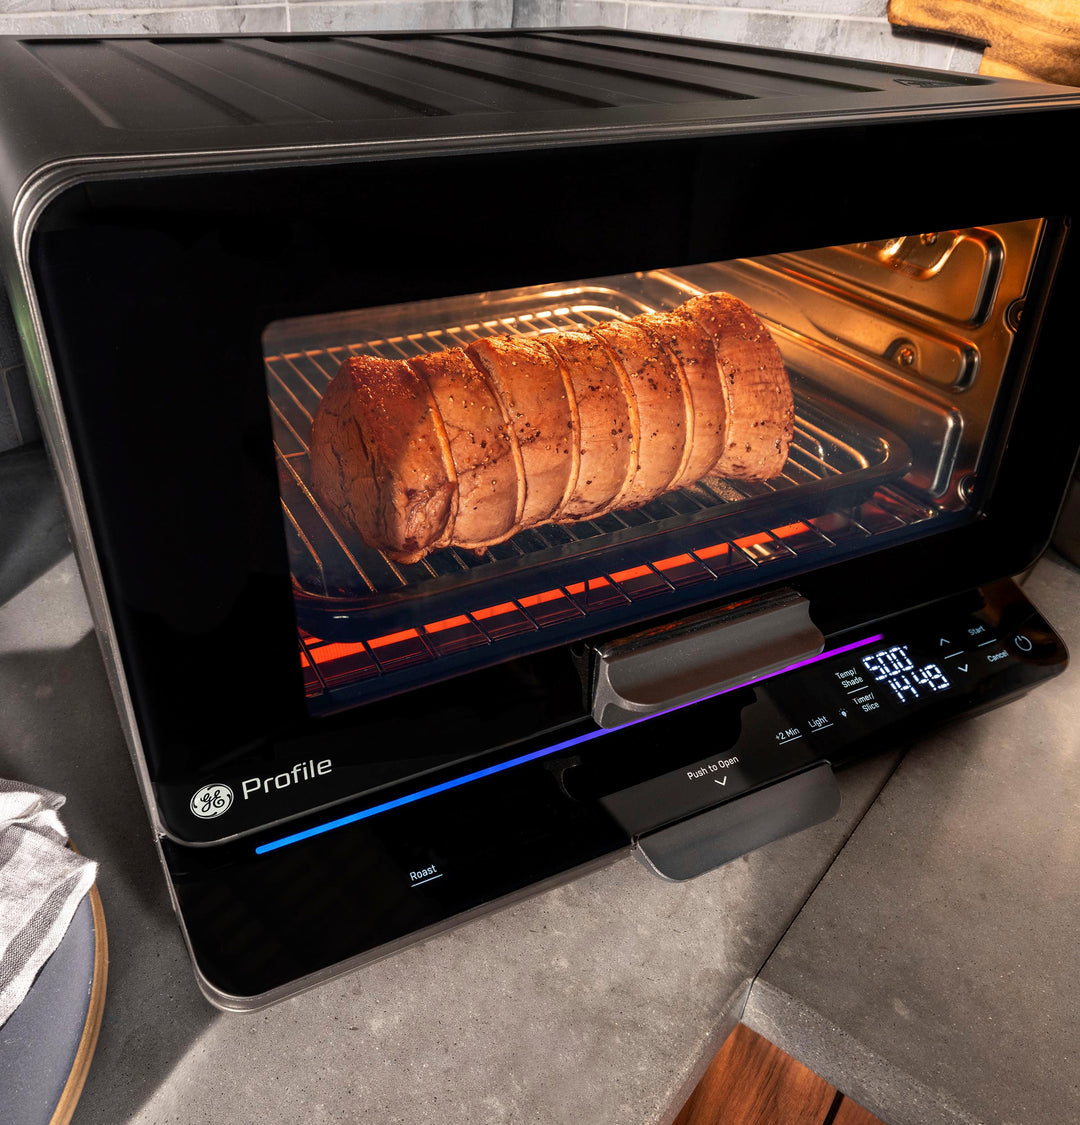 GE Profile - Smart Oven with No Preheat, Air Fry and Built-in WiFi - Black_8